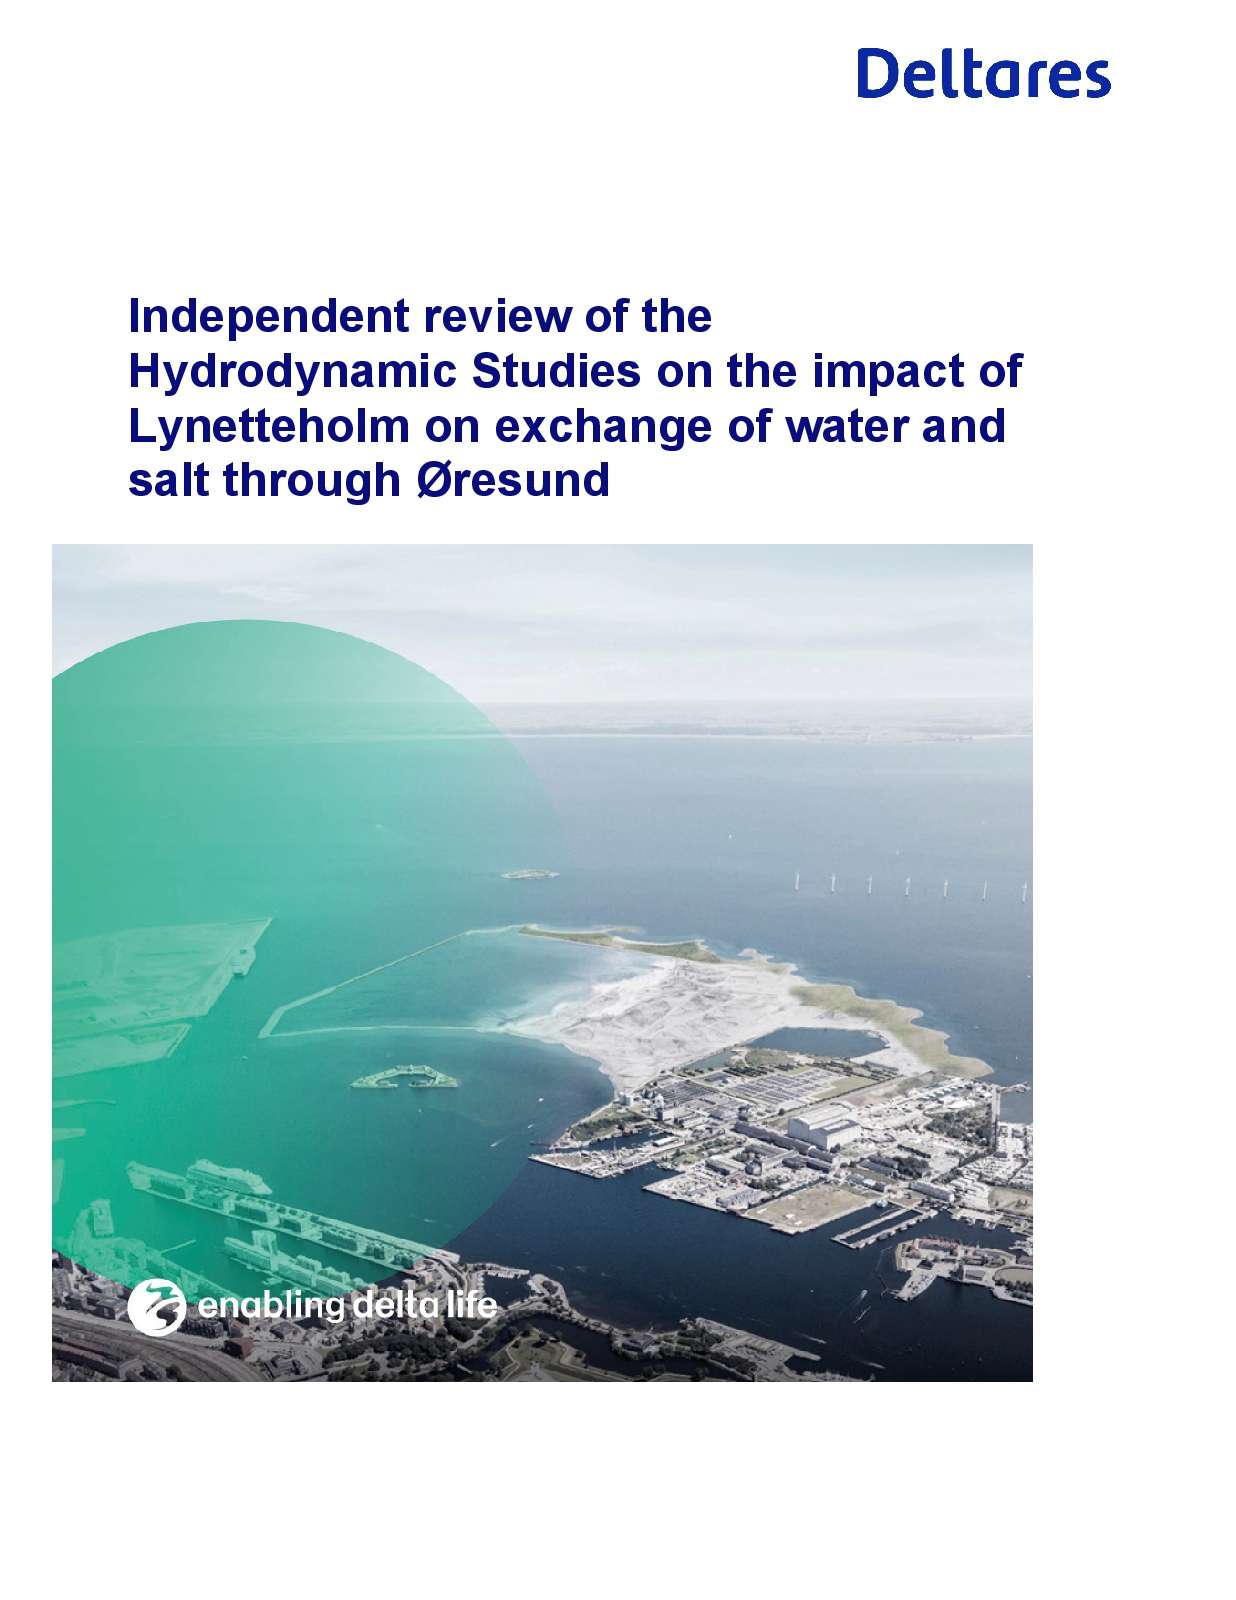 Independent review of the Hydrodynamic Studies on the impact of Lynetteholm on exchange of water and salt through Øresund